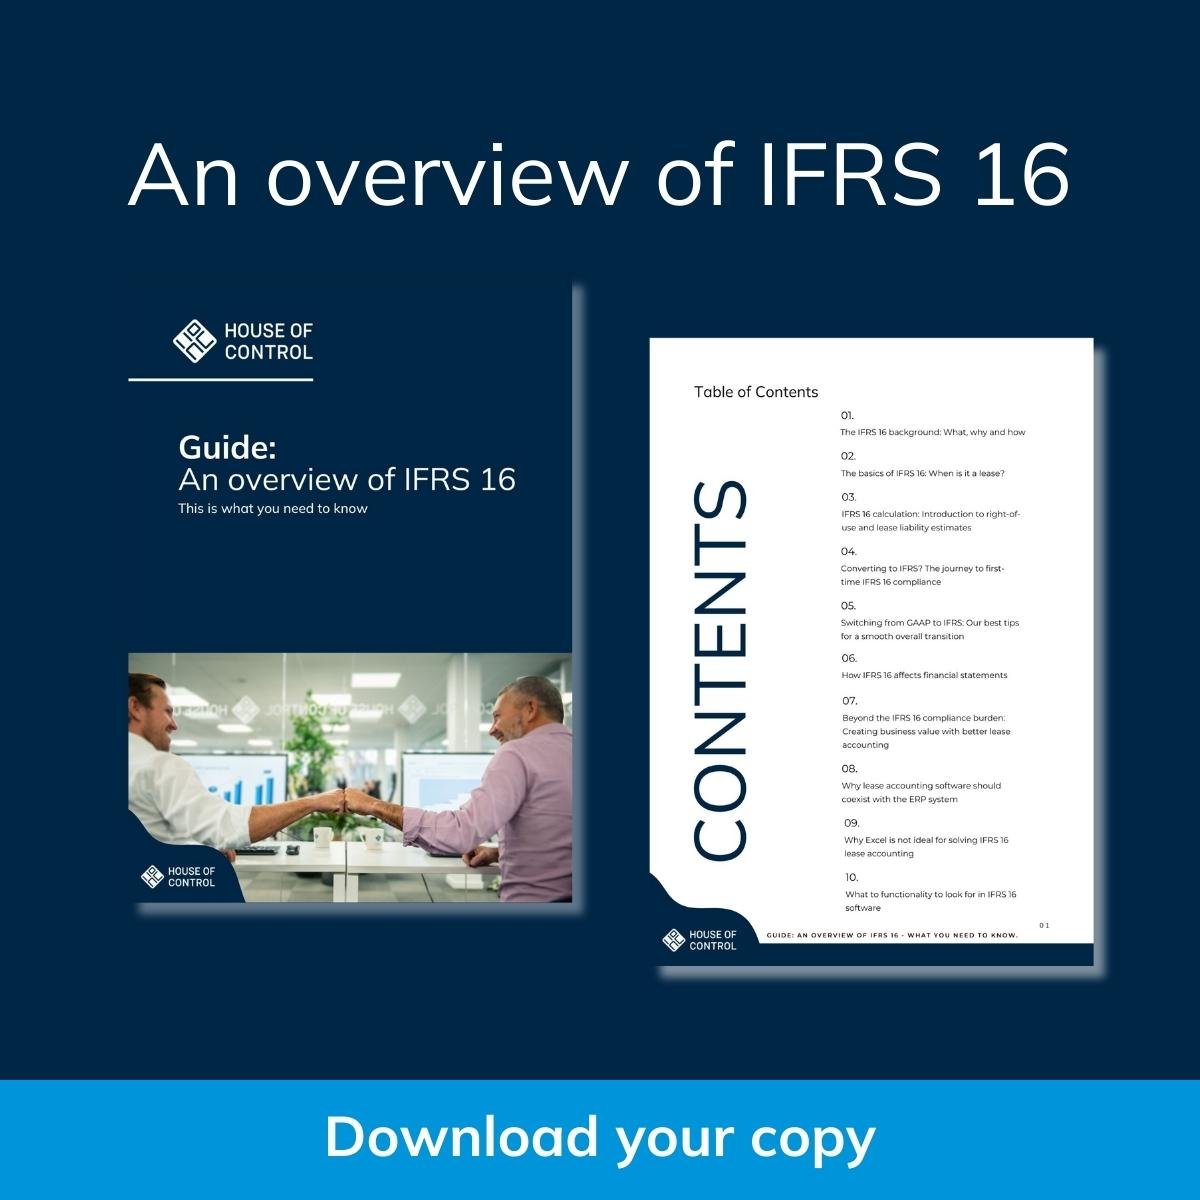 An overview of IFRS 16 - Guide